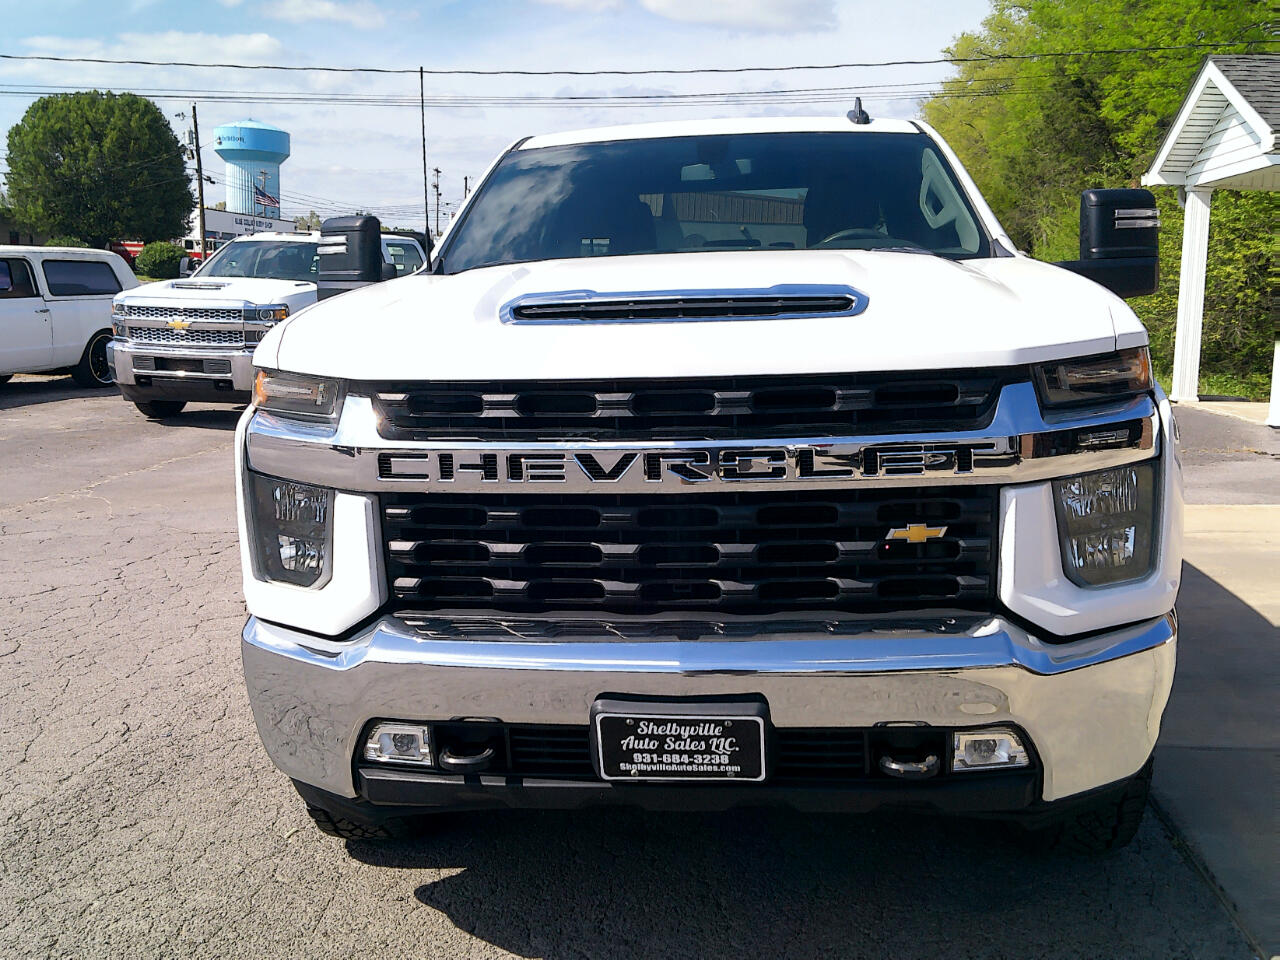 2020 Chevrolet Silverado 2500HD CHECK IT OUT4WDSTEP BARSCLEAN CARFAX